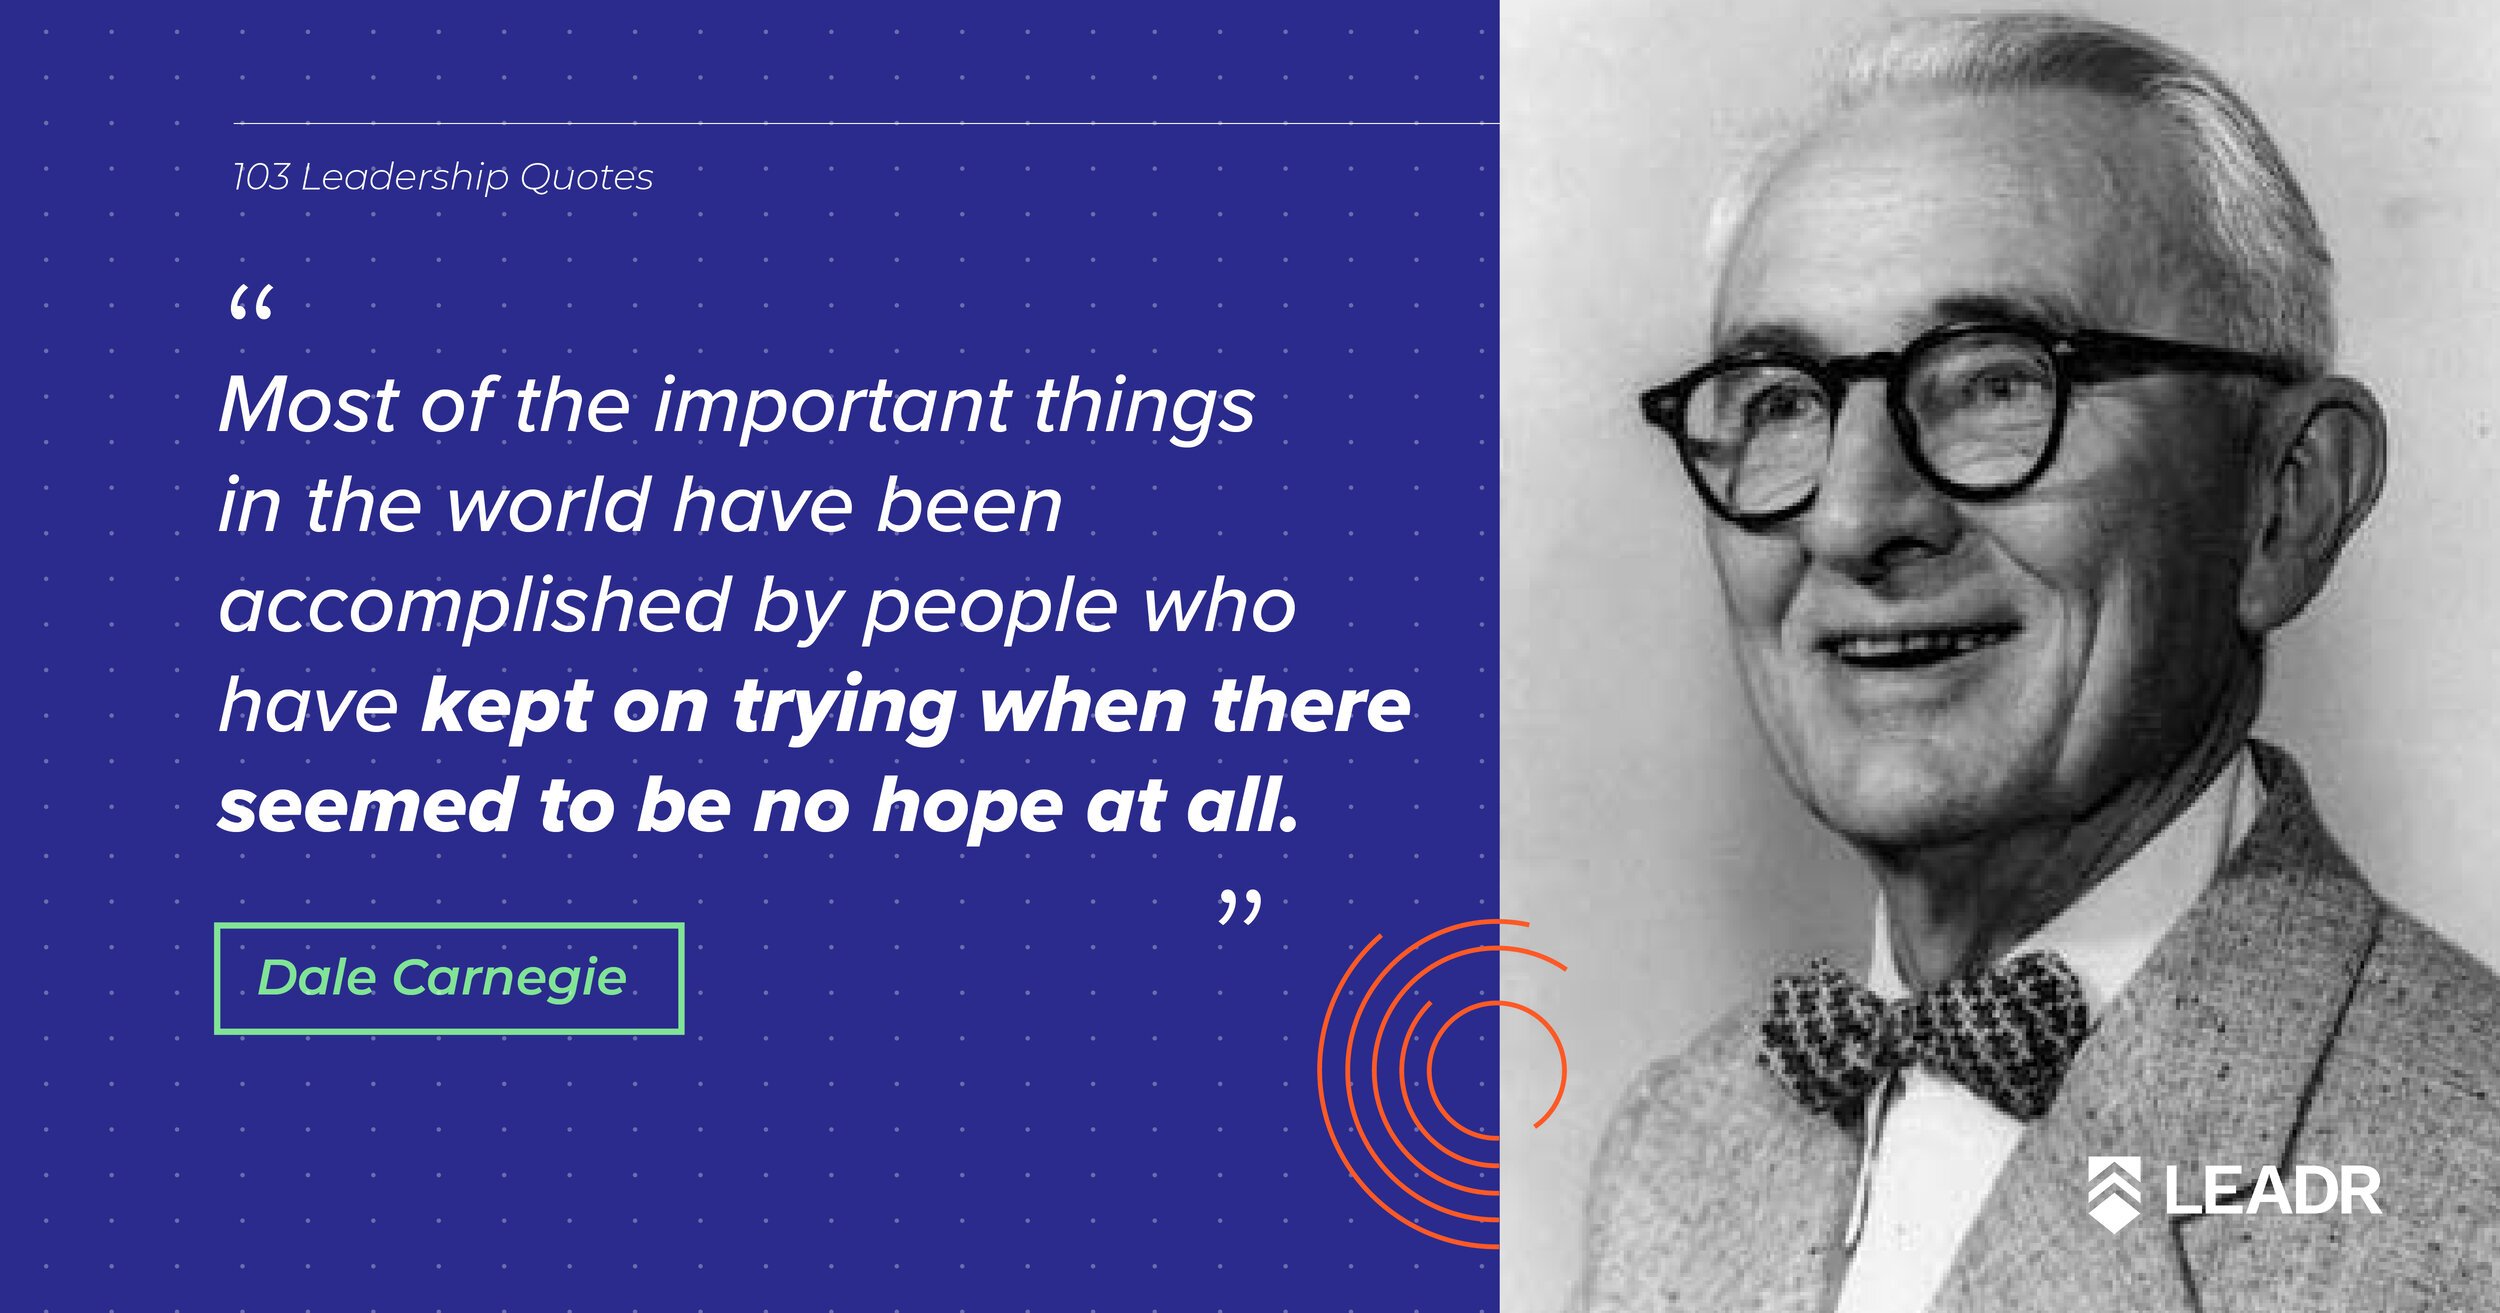 Royalty free downloadable leadership quotes - Dale Carnegie